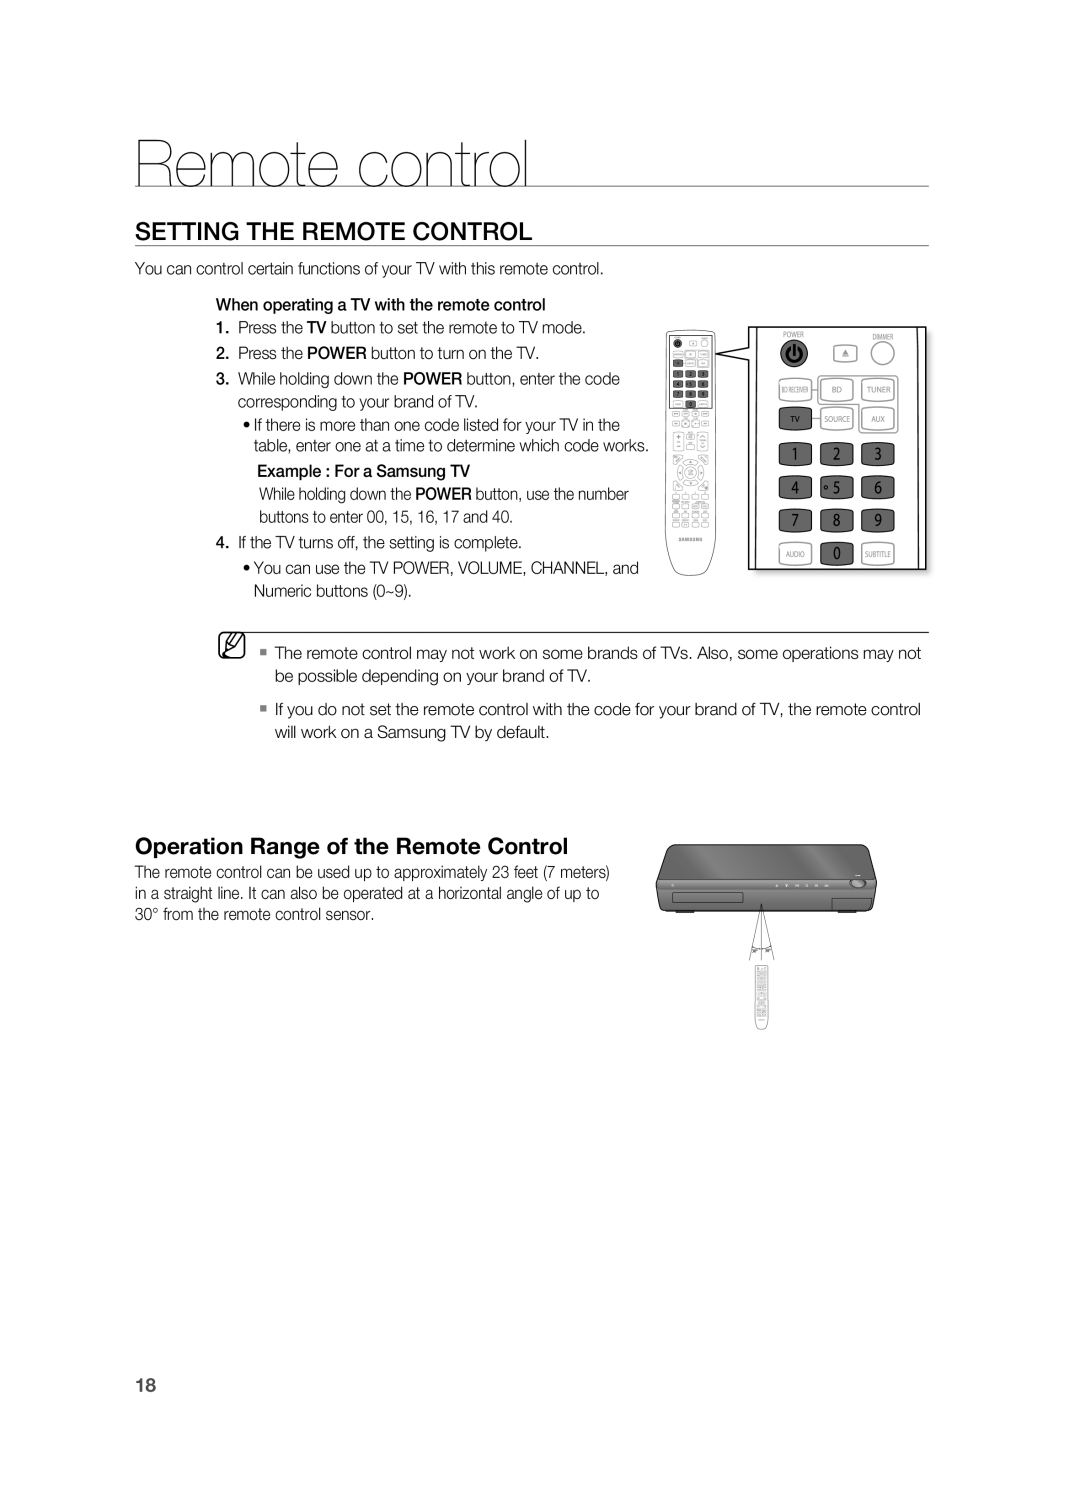 Samsung HT-BD3252 user manual Setting The Remote Control, Remote control, Operation Range of the Remote Control, M  